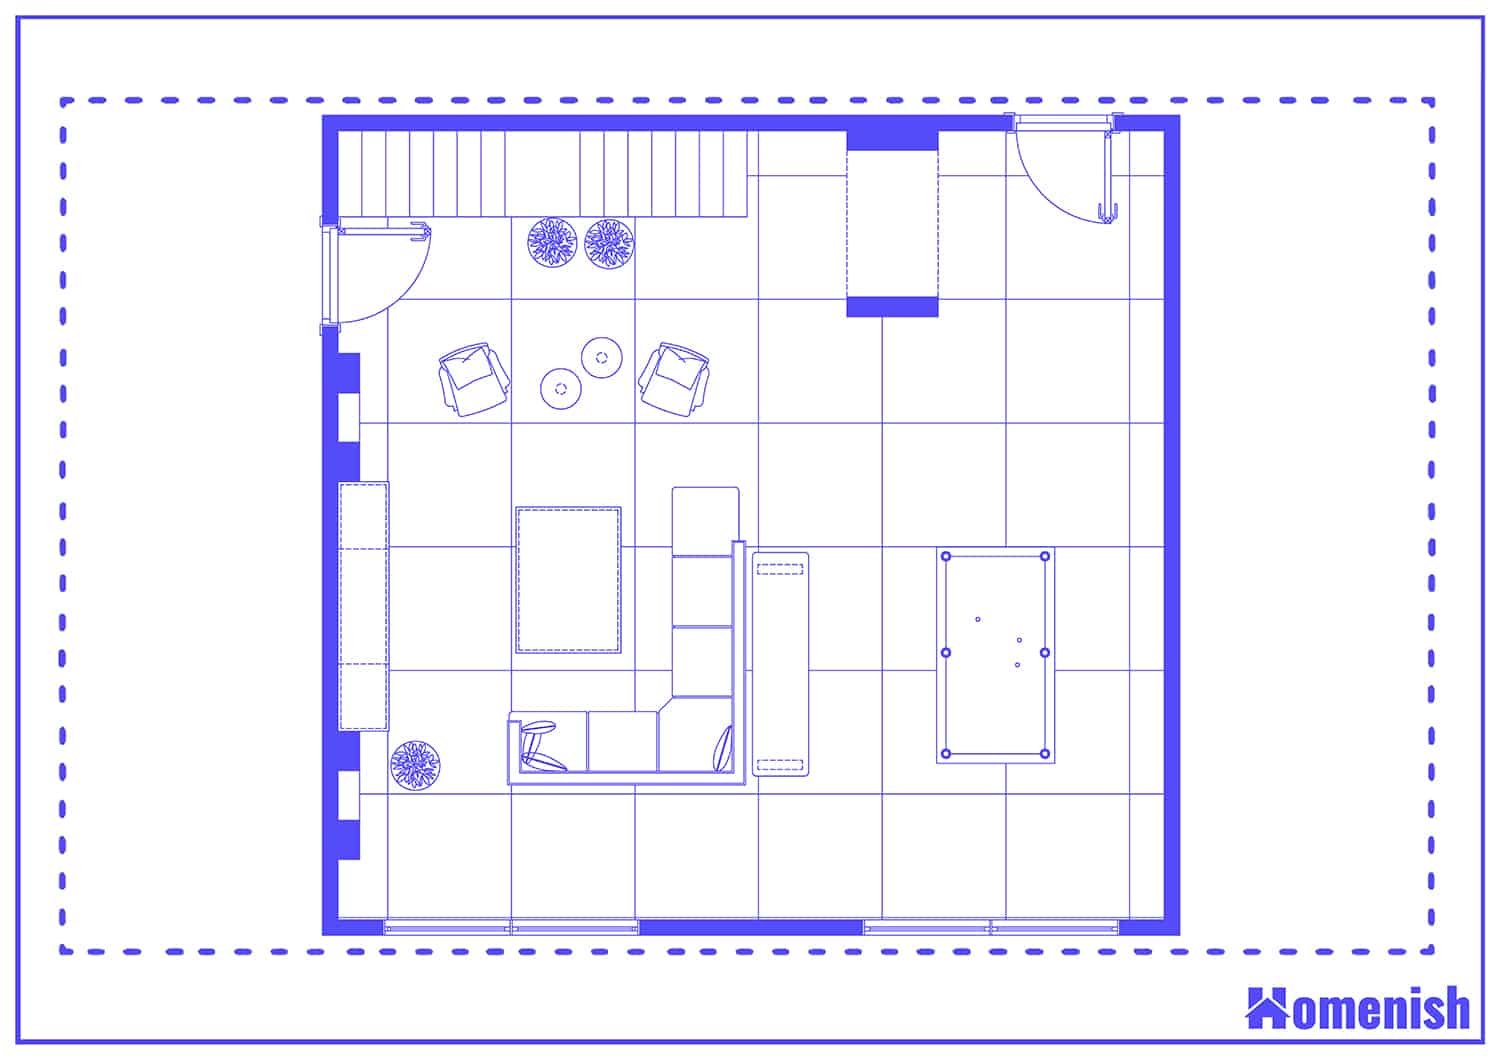 Sectioned Entertainment Room Layout Floor Plan